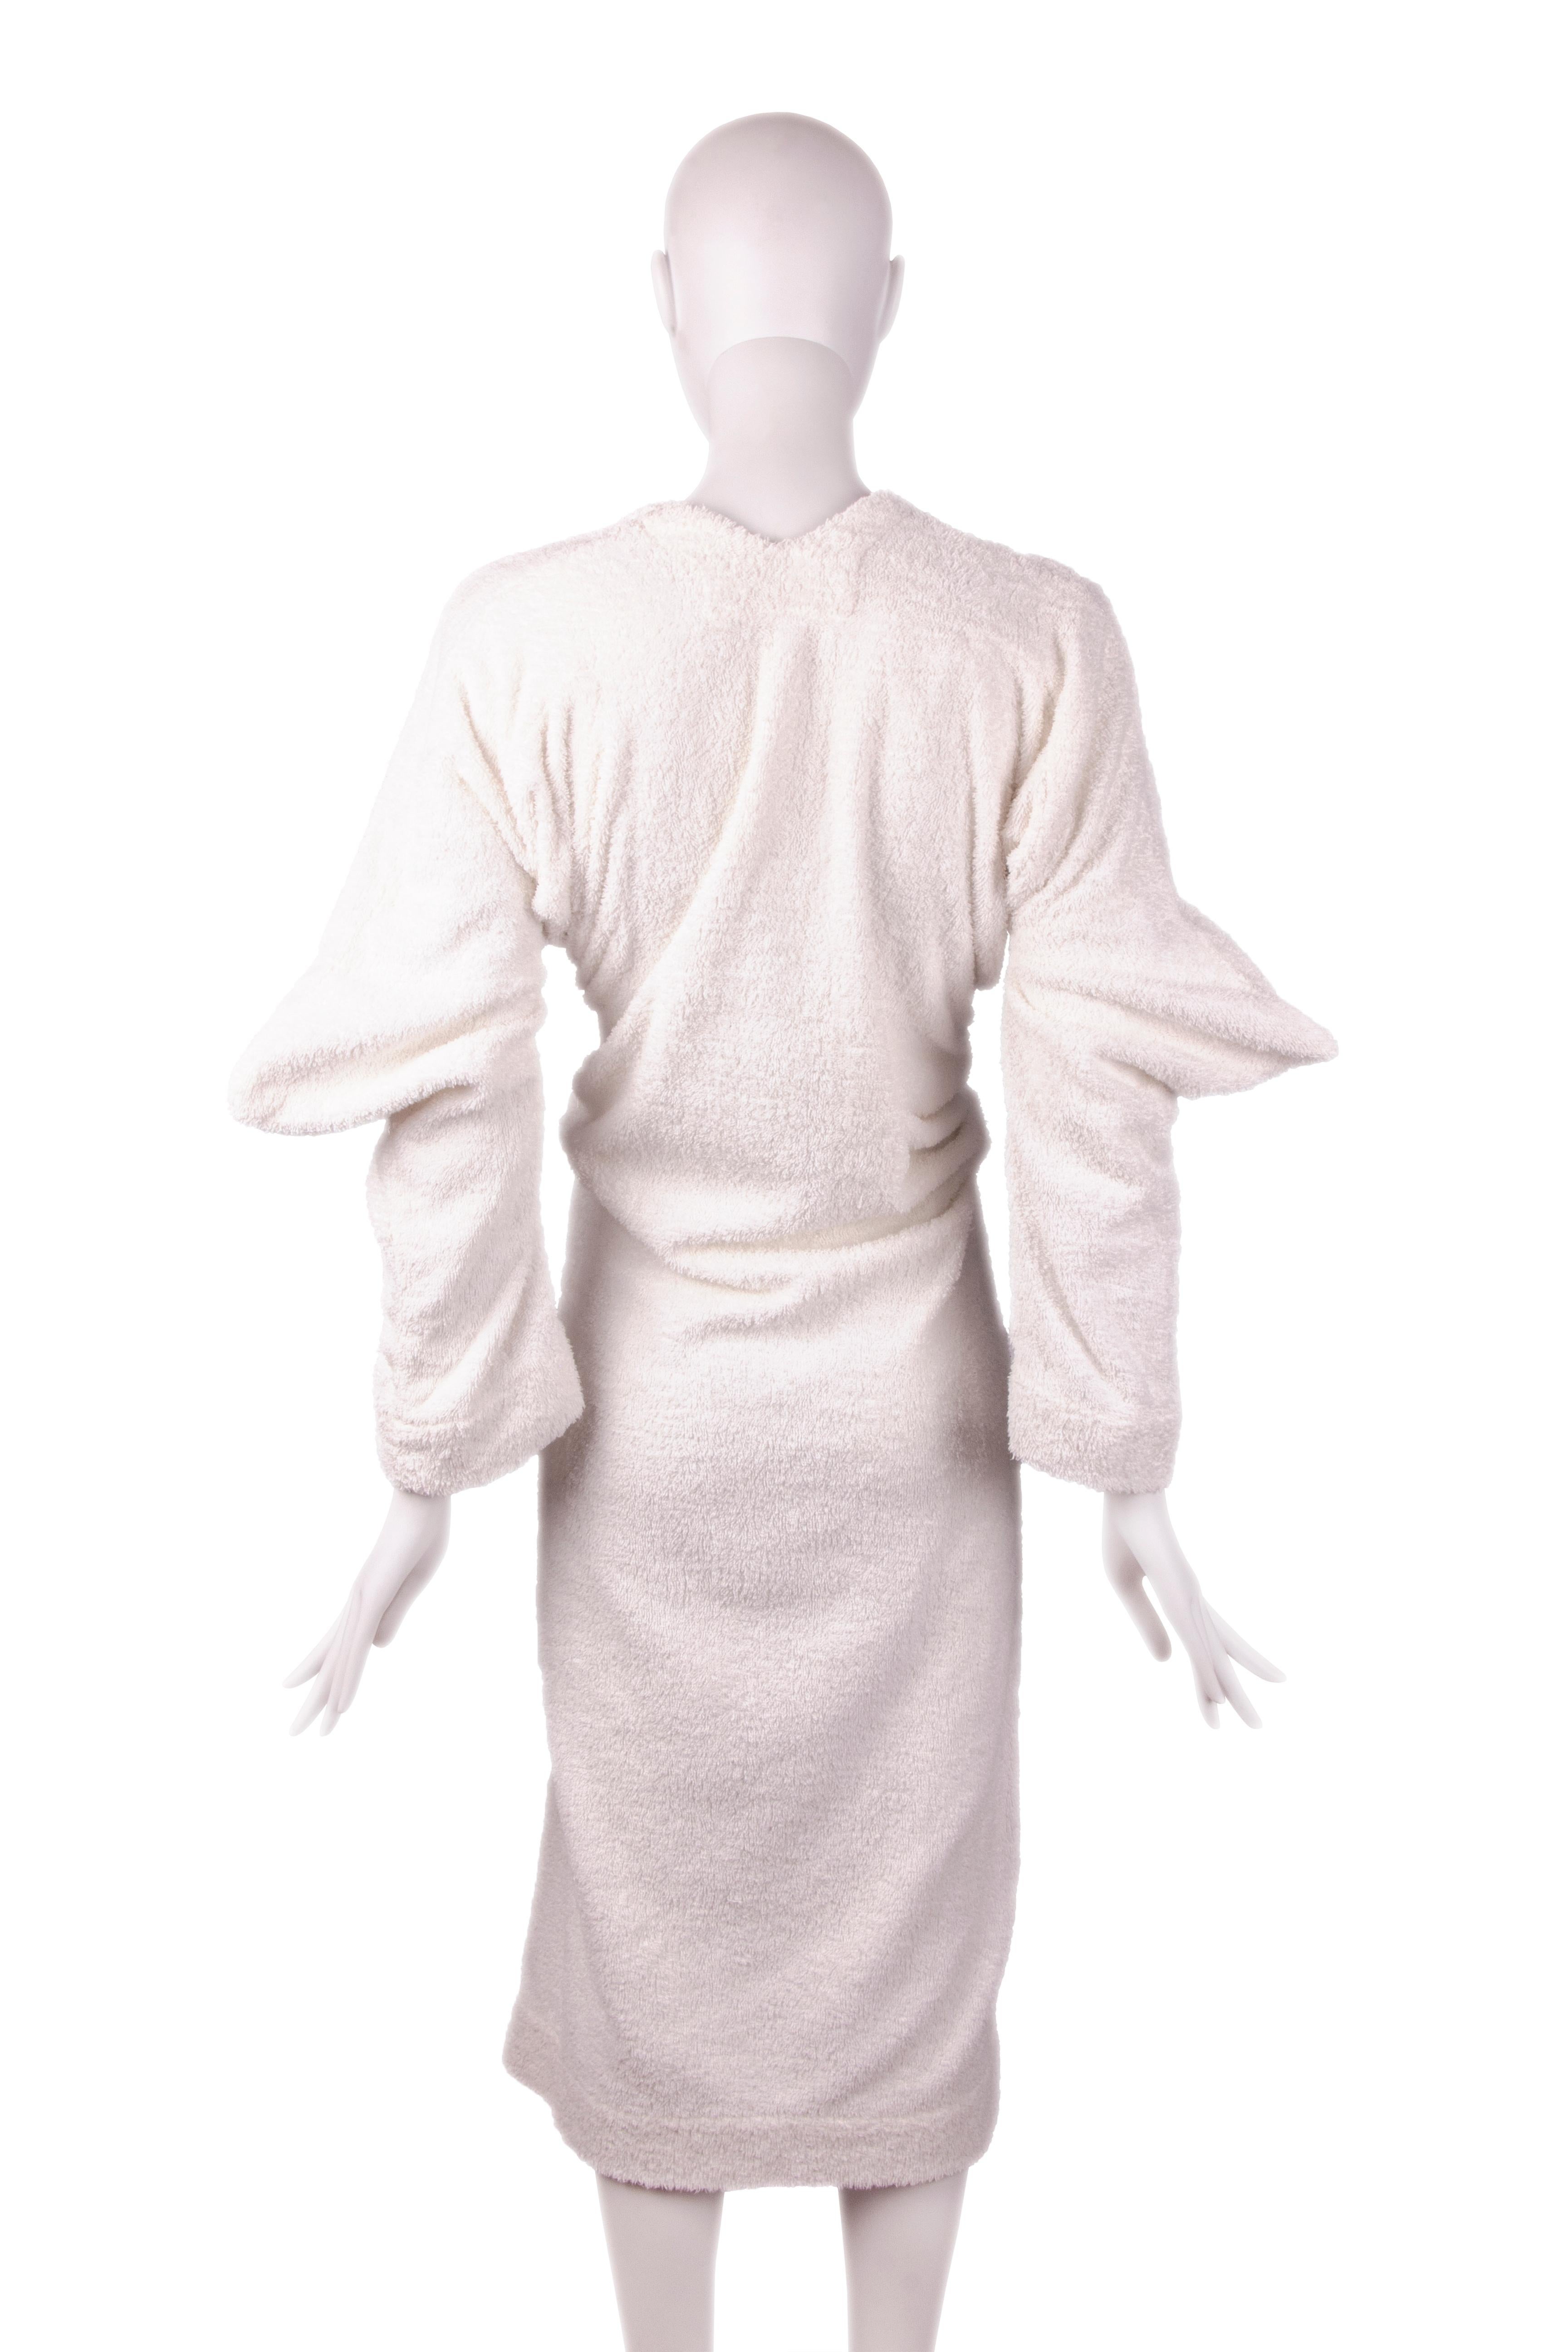 Worlds End by Vivienne Westwood cotton toweling 'Witches' dress, fw 1983 For Sale 4